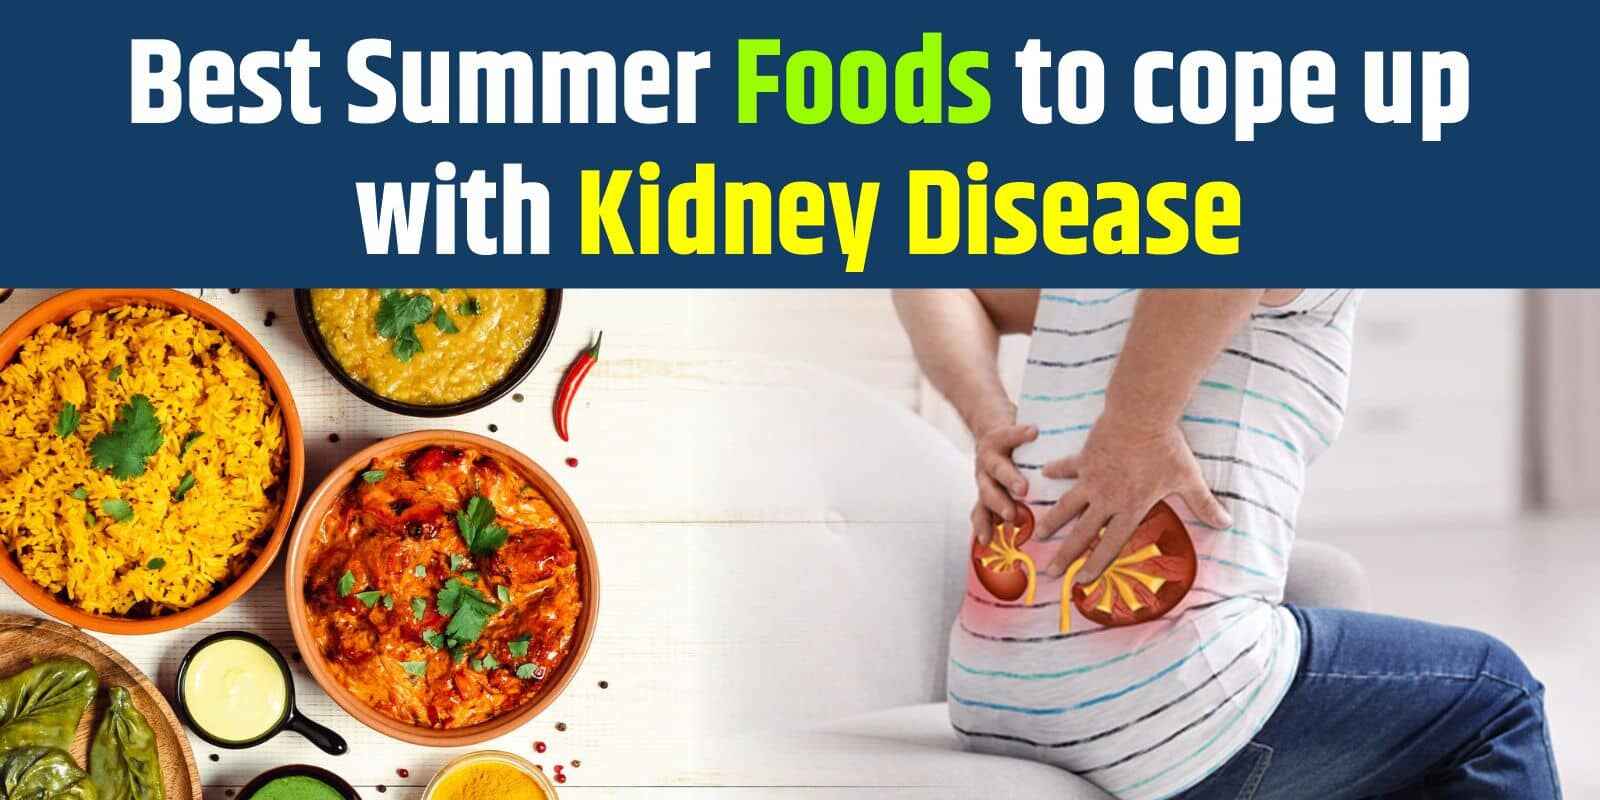 Best Summer Foods to cope up with Kidney Disease